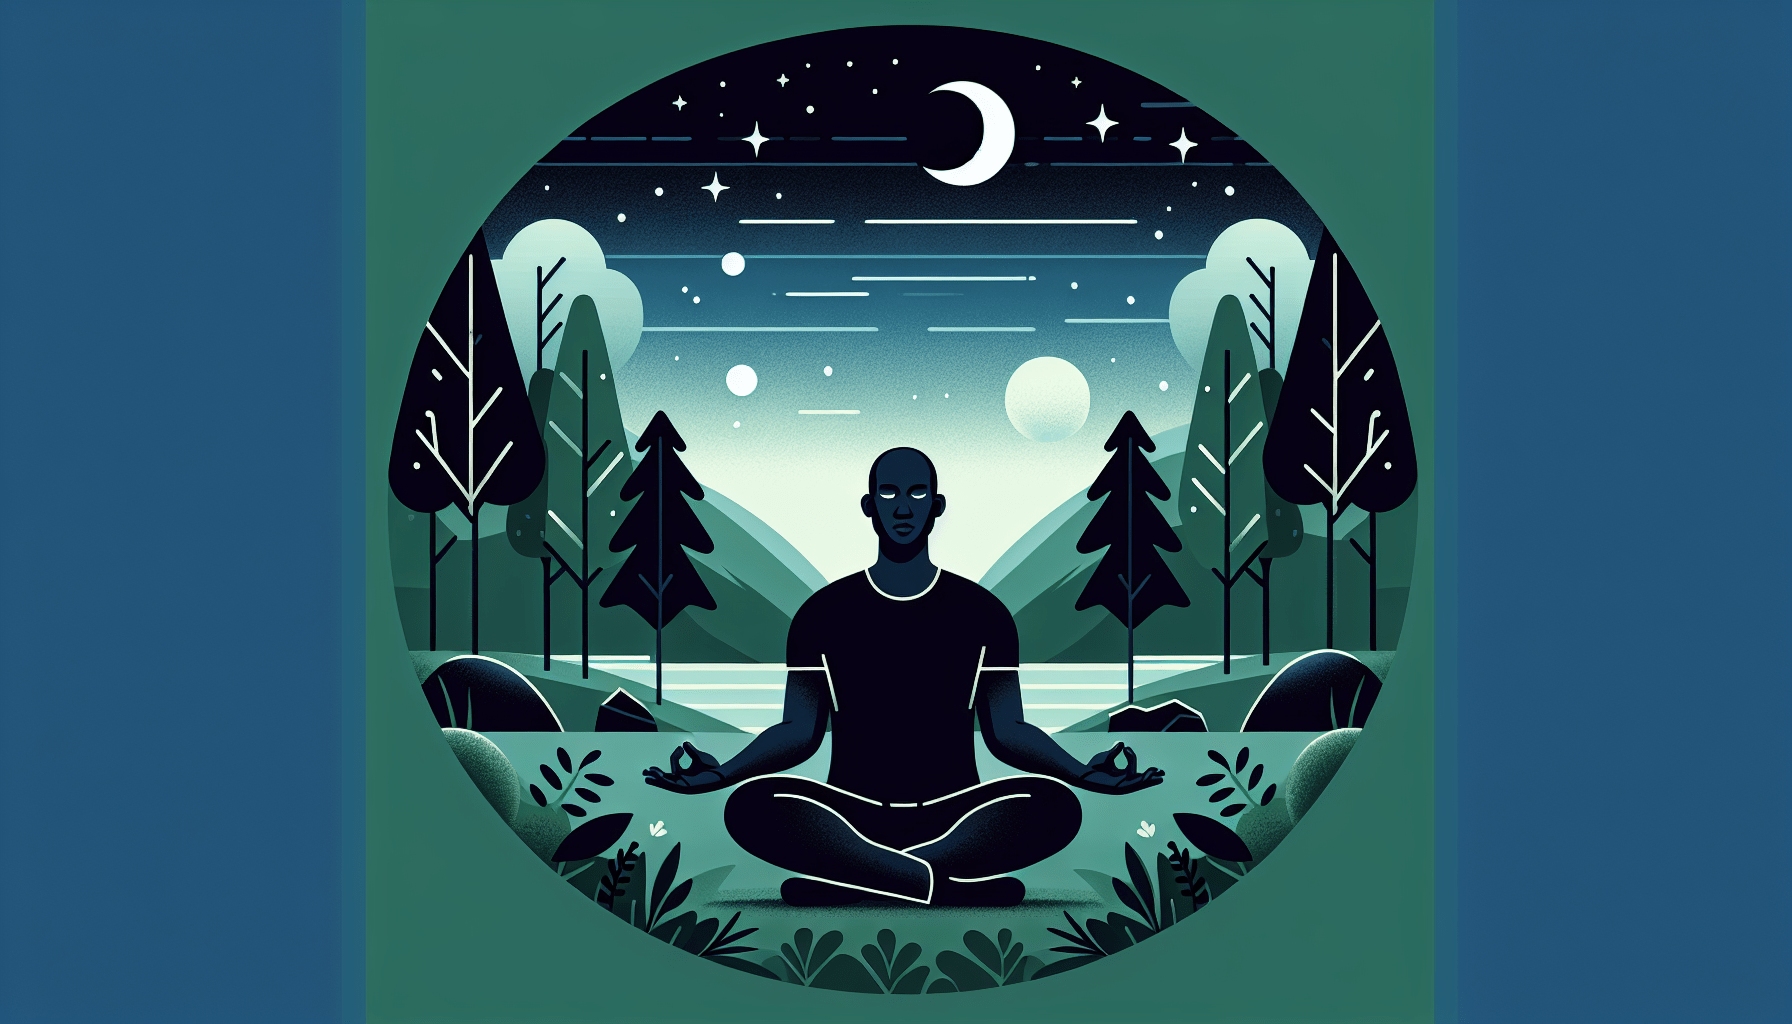 Illustration of a person meditating in a serene forest setting under a starry night sky with mountains in the background.